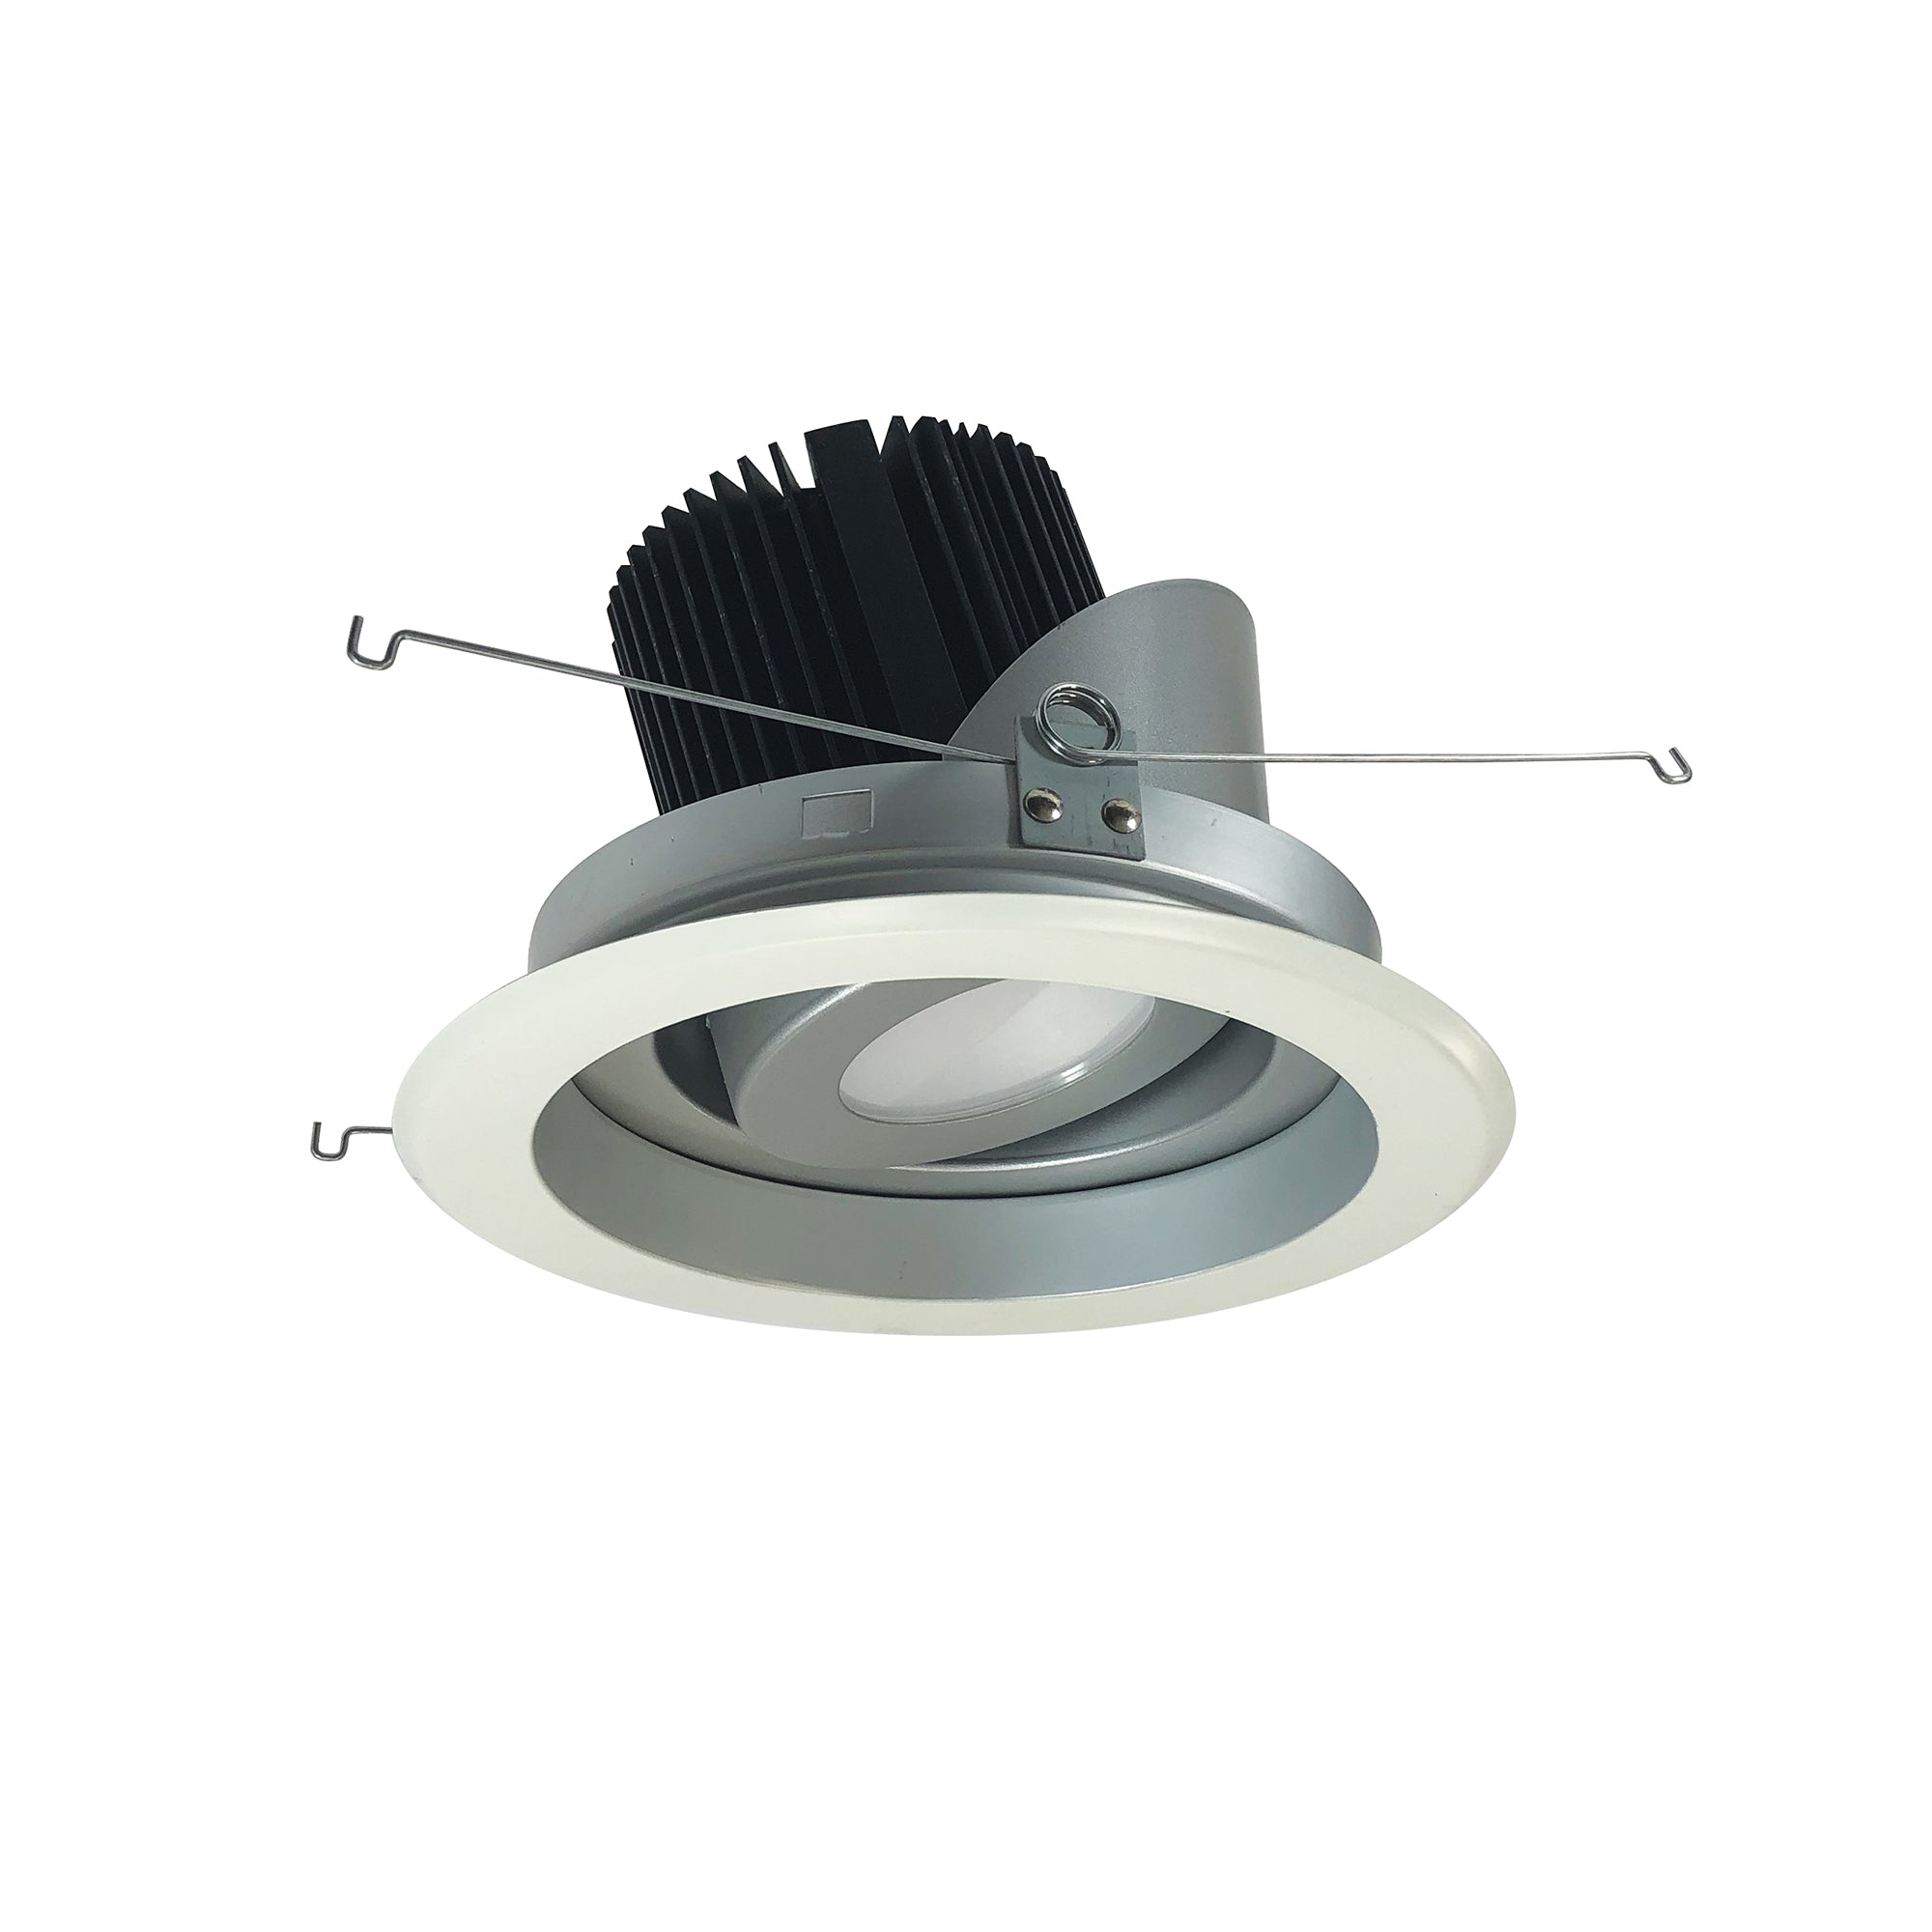 Nora Lighting NRM2-619L2540FHZW - Recessed - 6 Inch Marquise II Round Regressed Adj. Reflector, Flood, 2500lm, 4000K, Haze/White (Not Compatible with NHRM2-625 Housings)